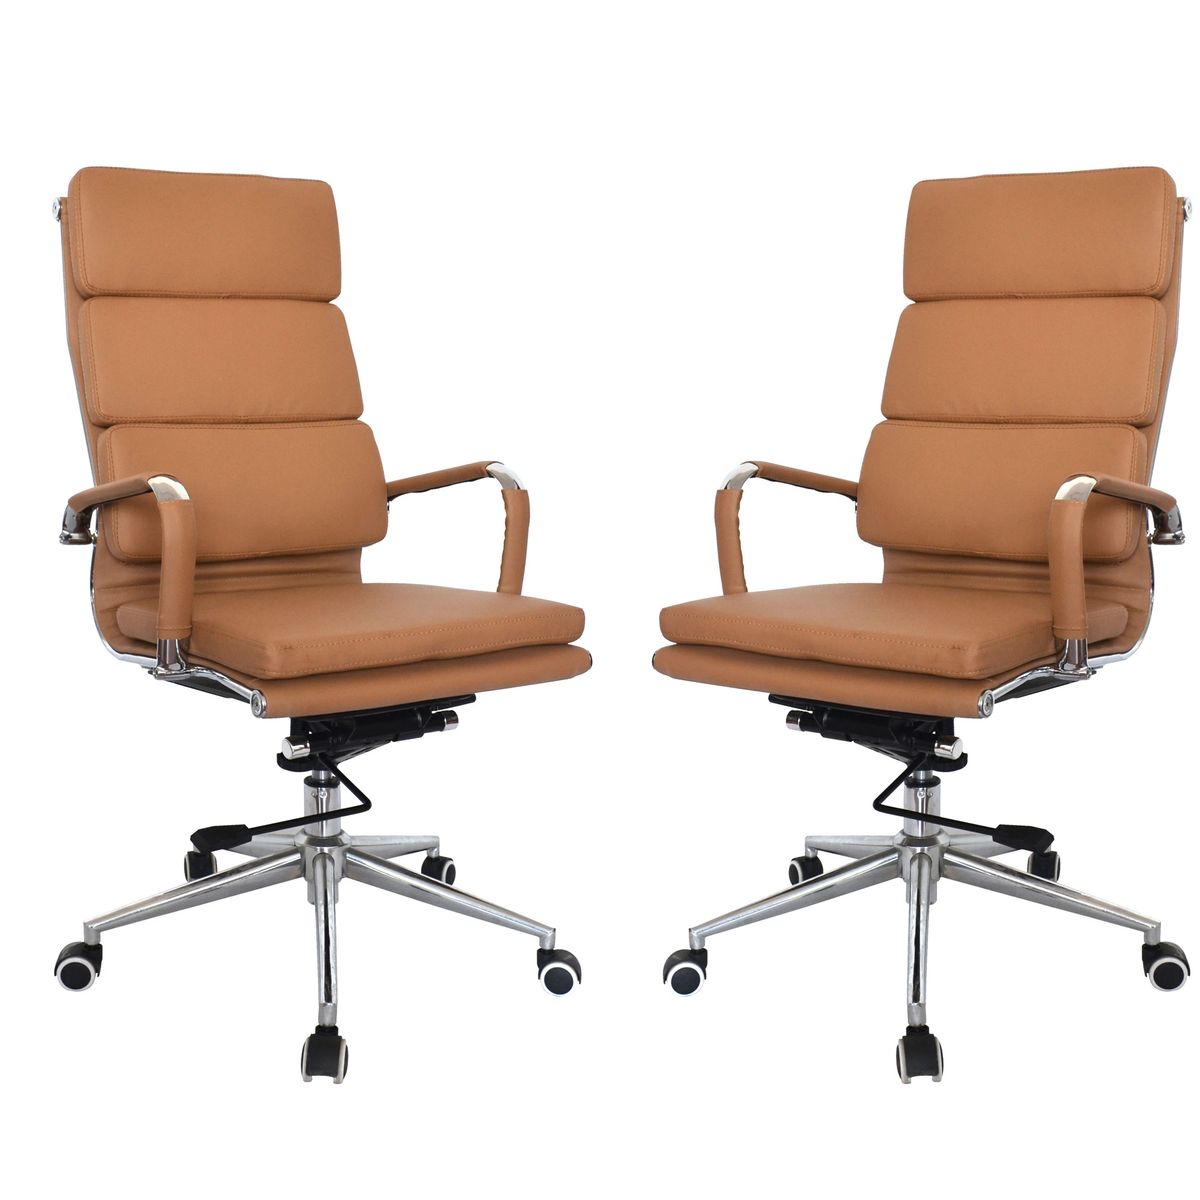 Classic PU Cushion High Back Office Chairs-Set of 2 Per Box-Camel | Buy  Online in South Africa 